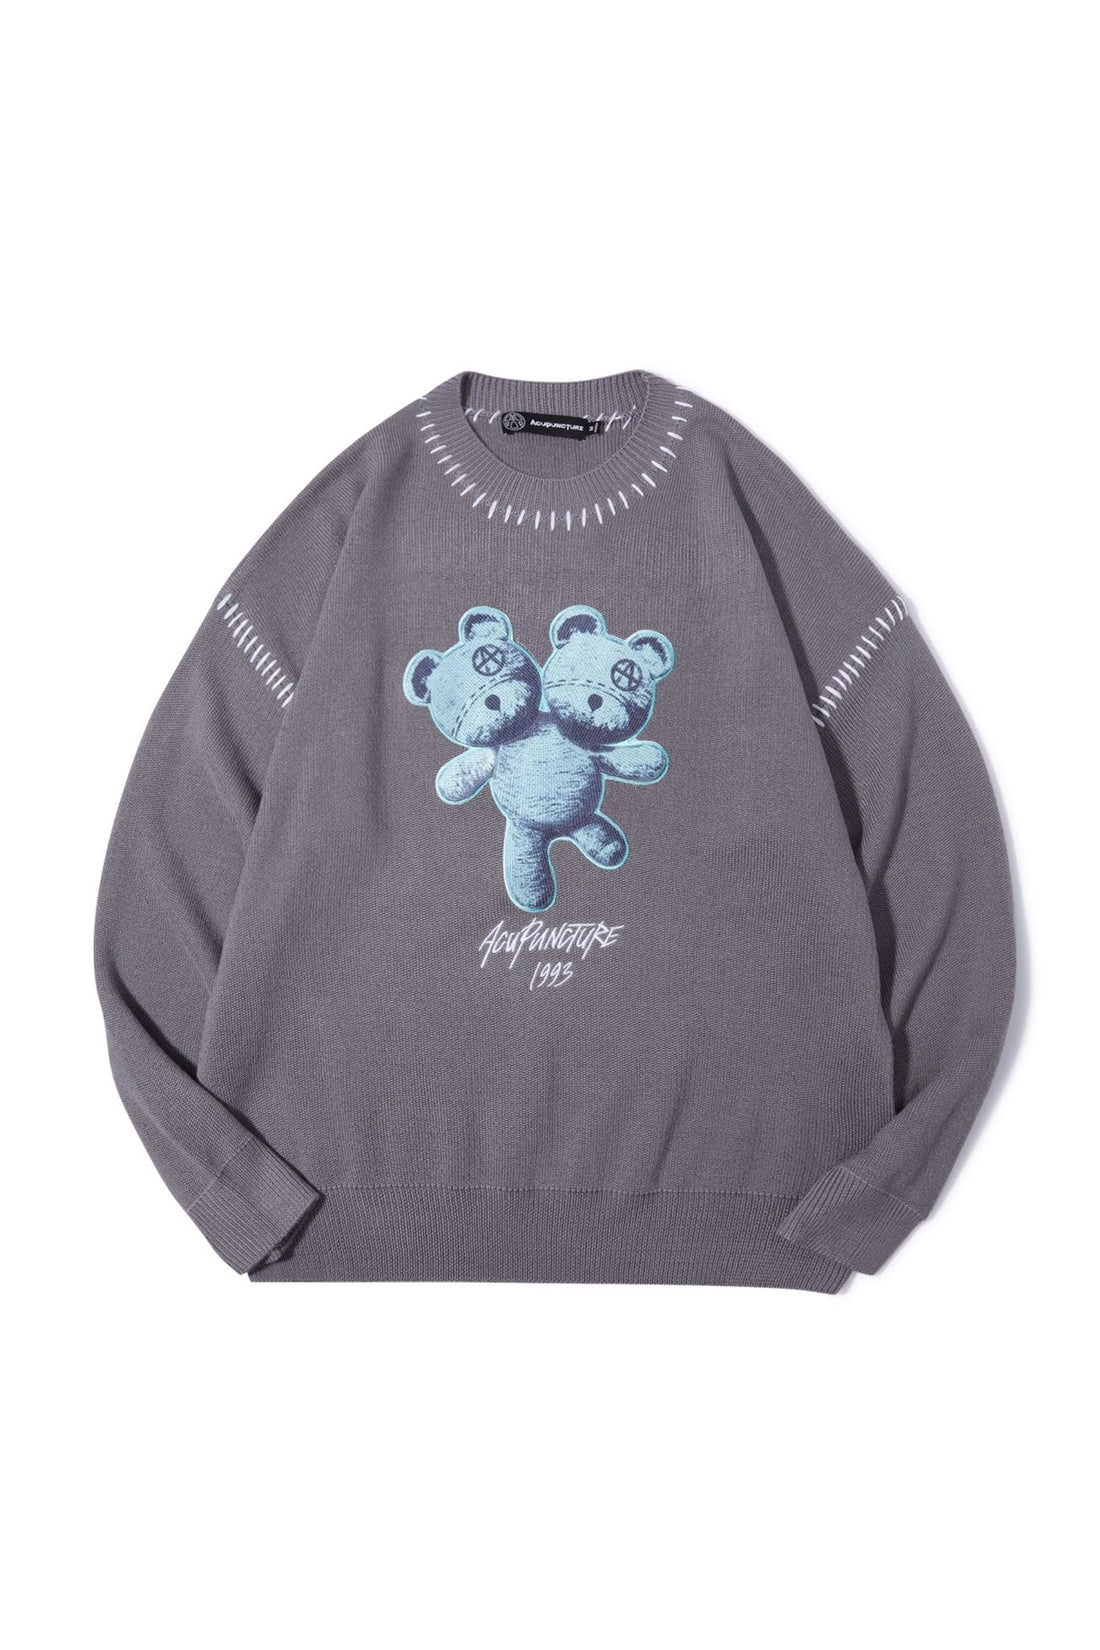 BEAR SWEATER GREY Acupuncture